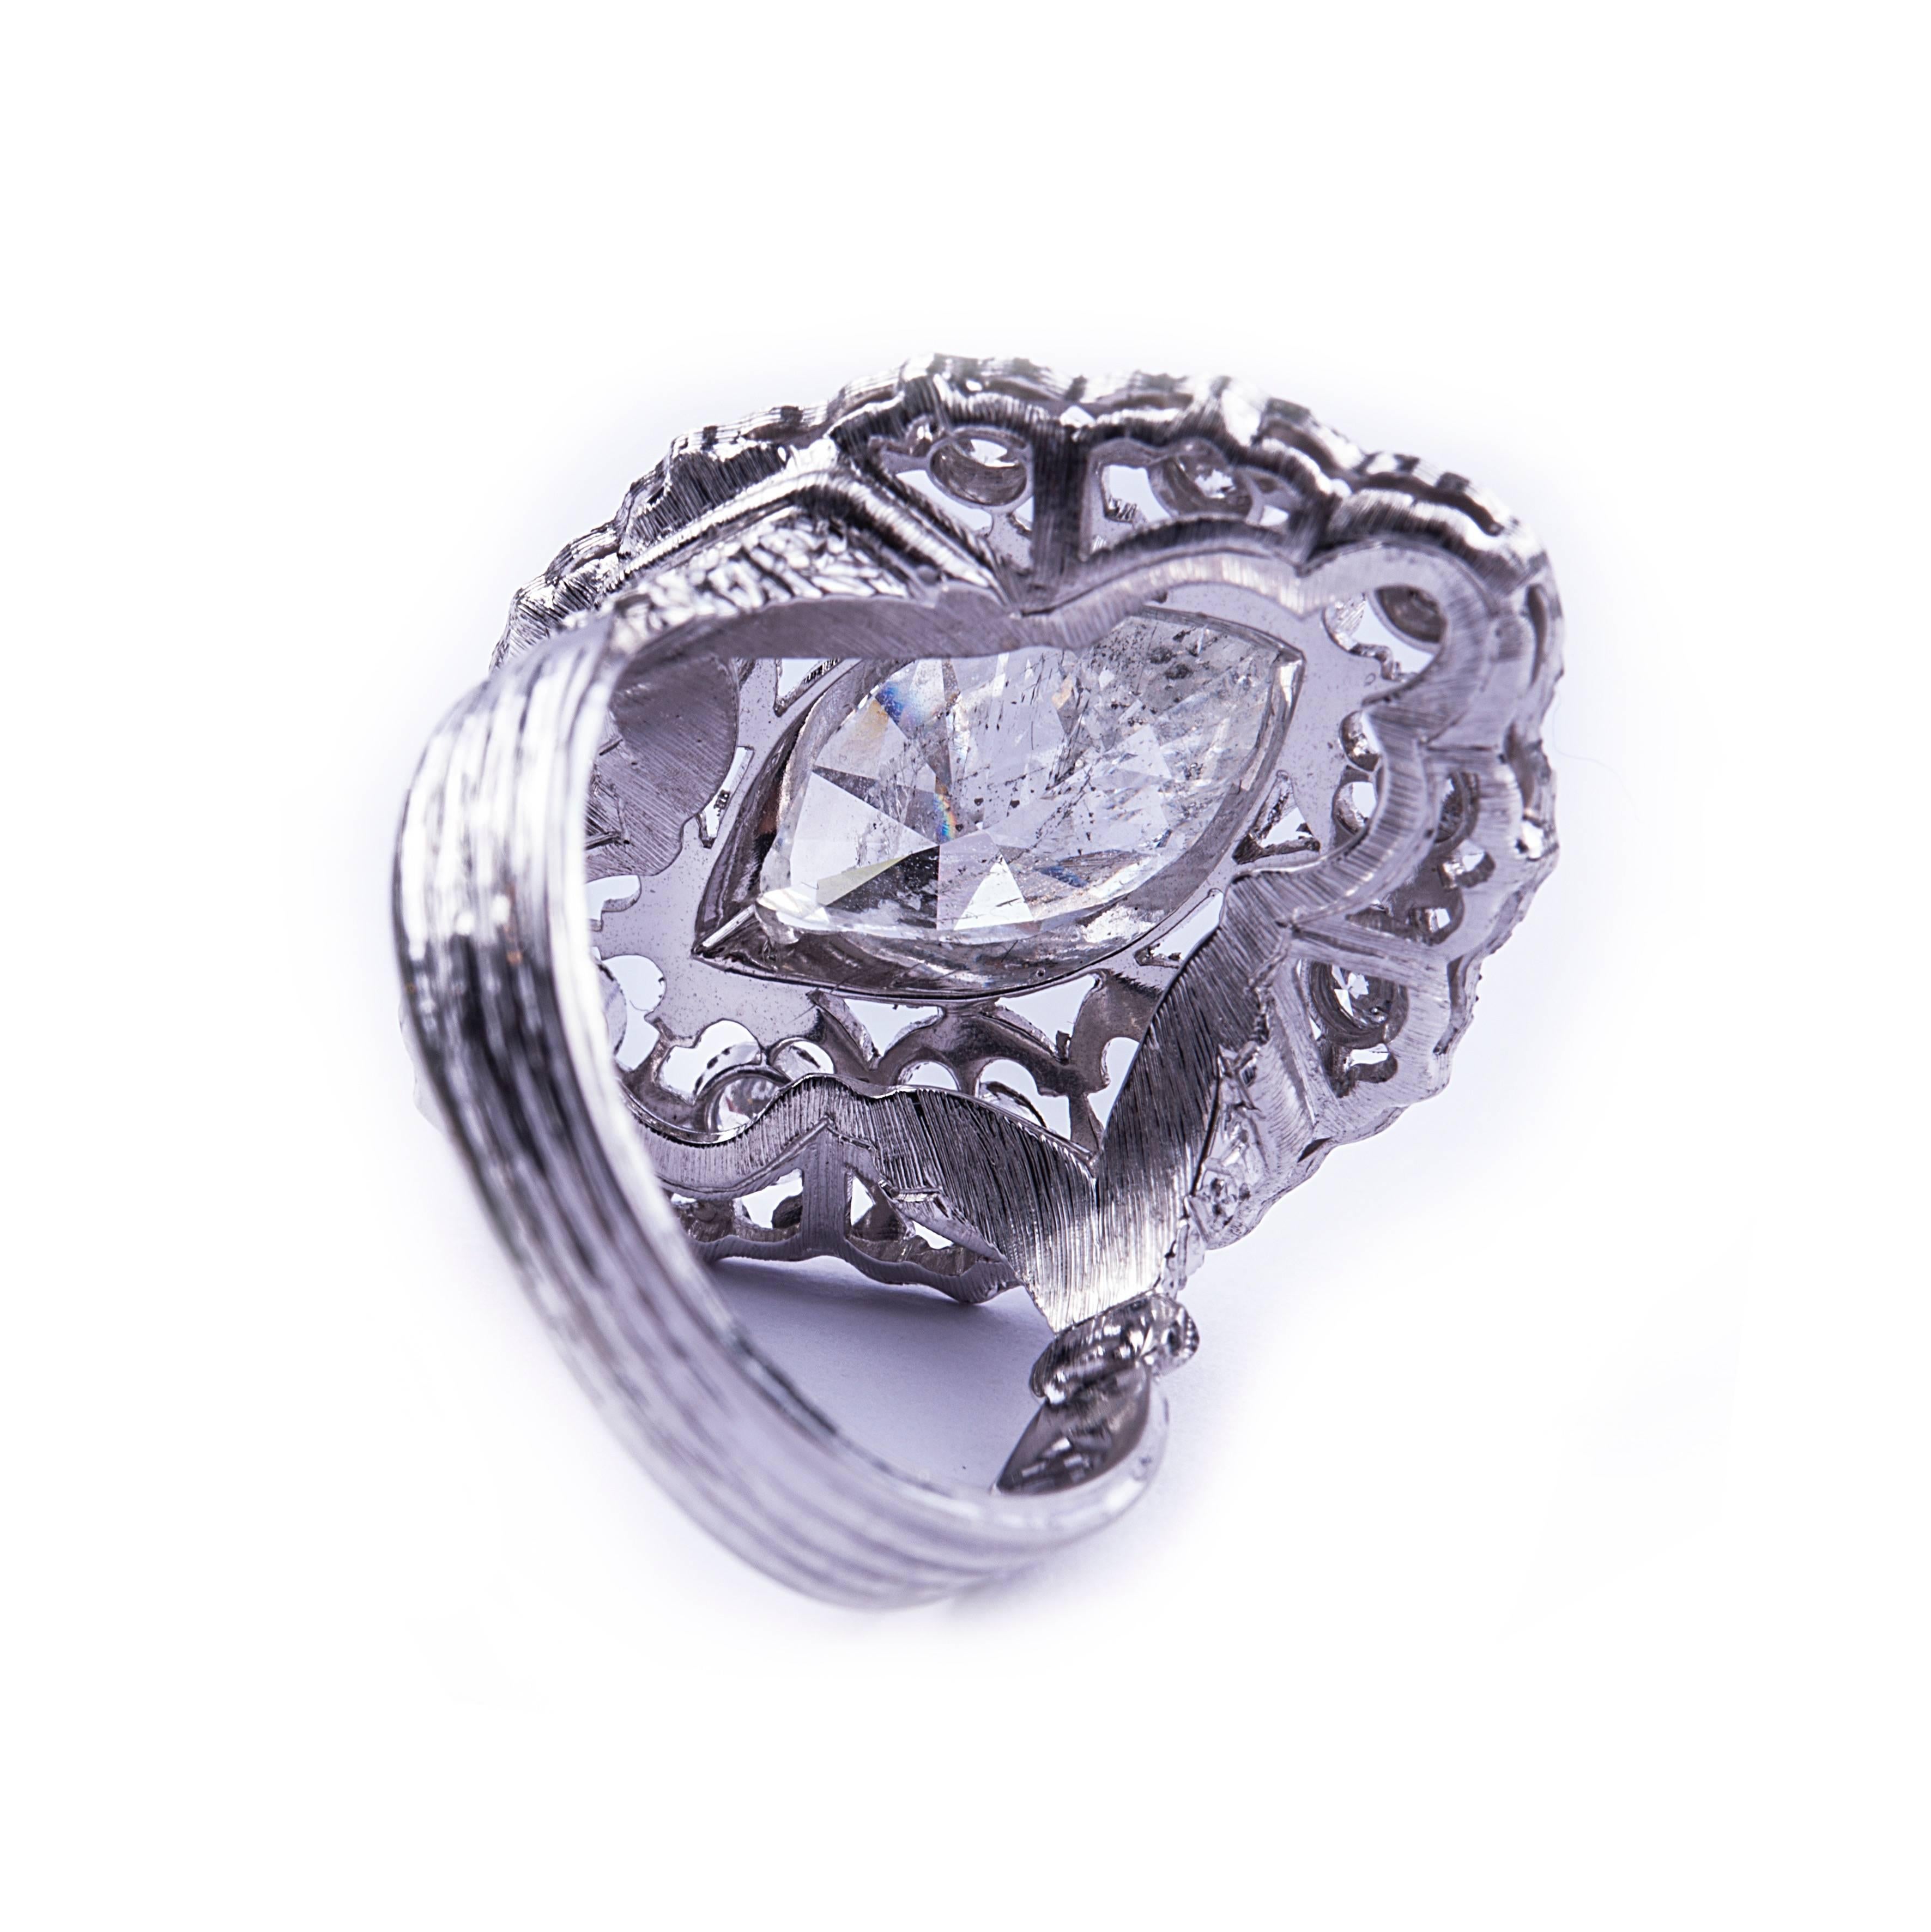 Marquise Diamond Ring surrounded by round diamonds

Marquise Cut Diamond: 3.5 ct ca.
Round Diamonds: 1 ct ca.